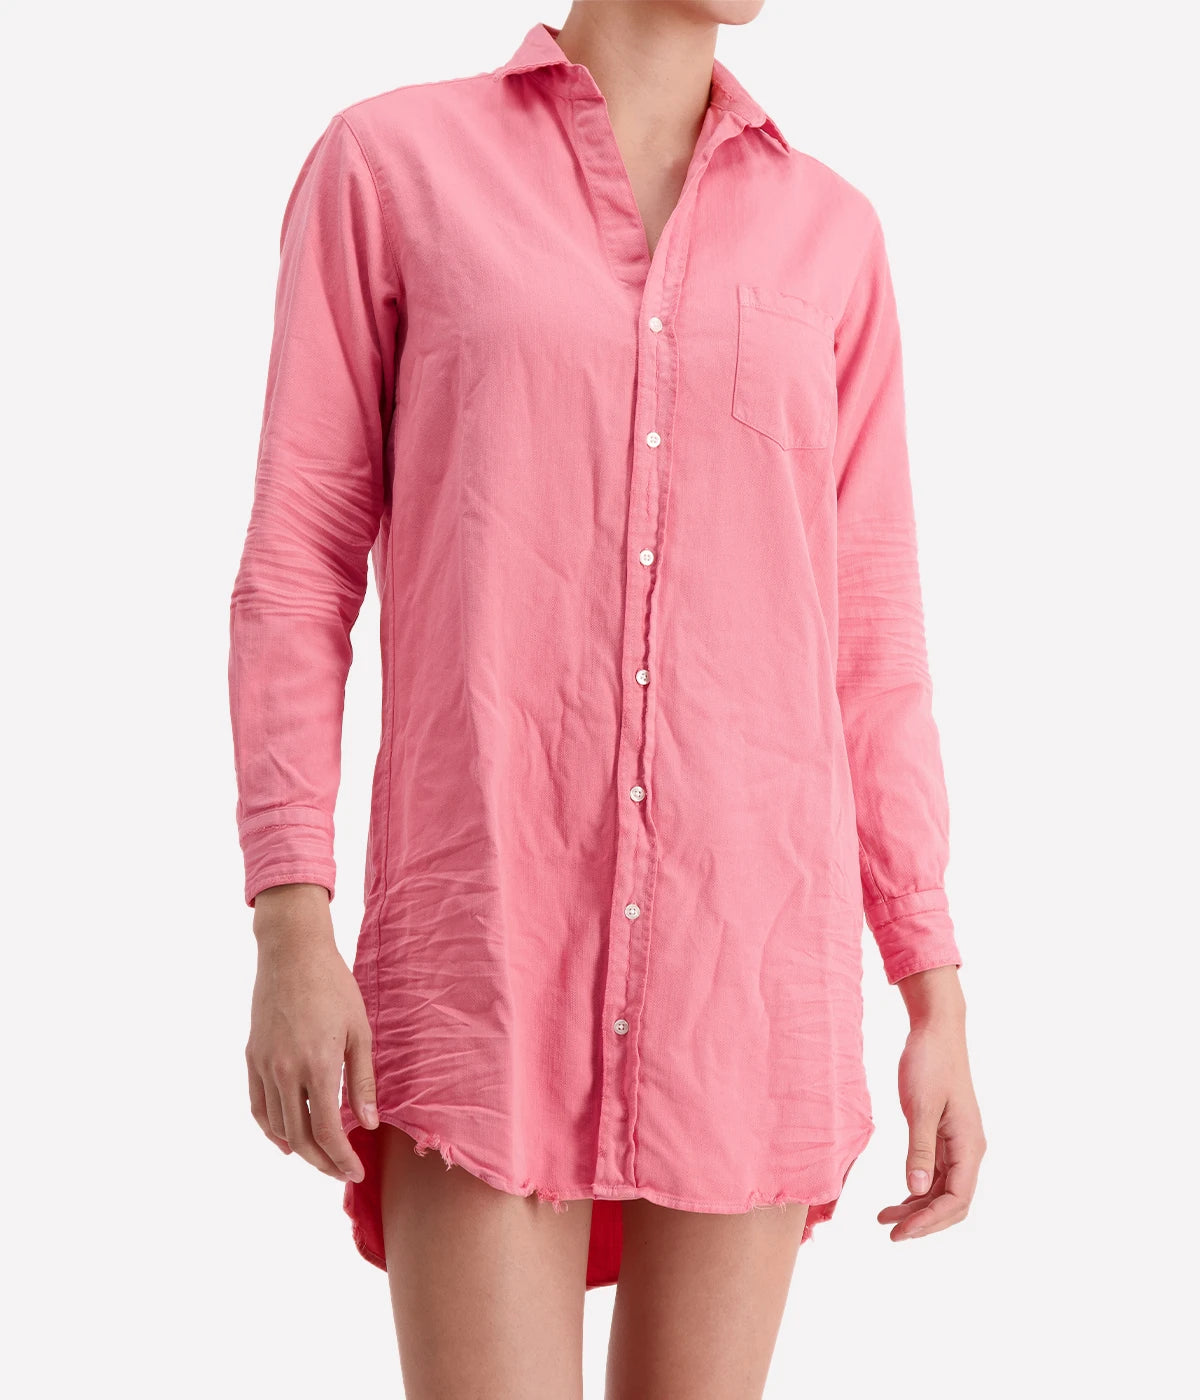 Mary Woven Button Up Denim Dress in Grapefruit